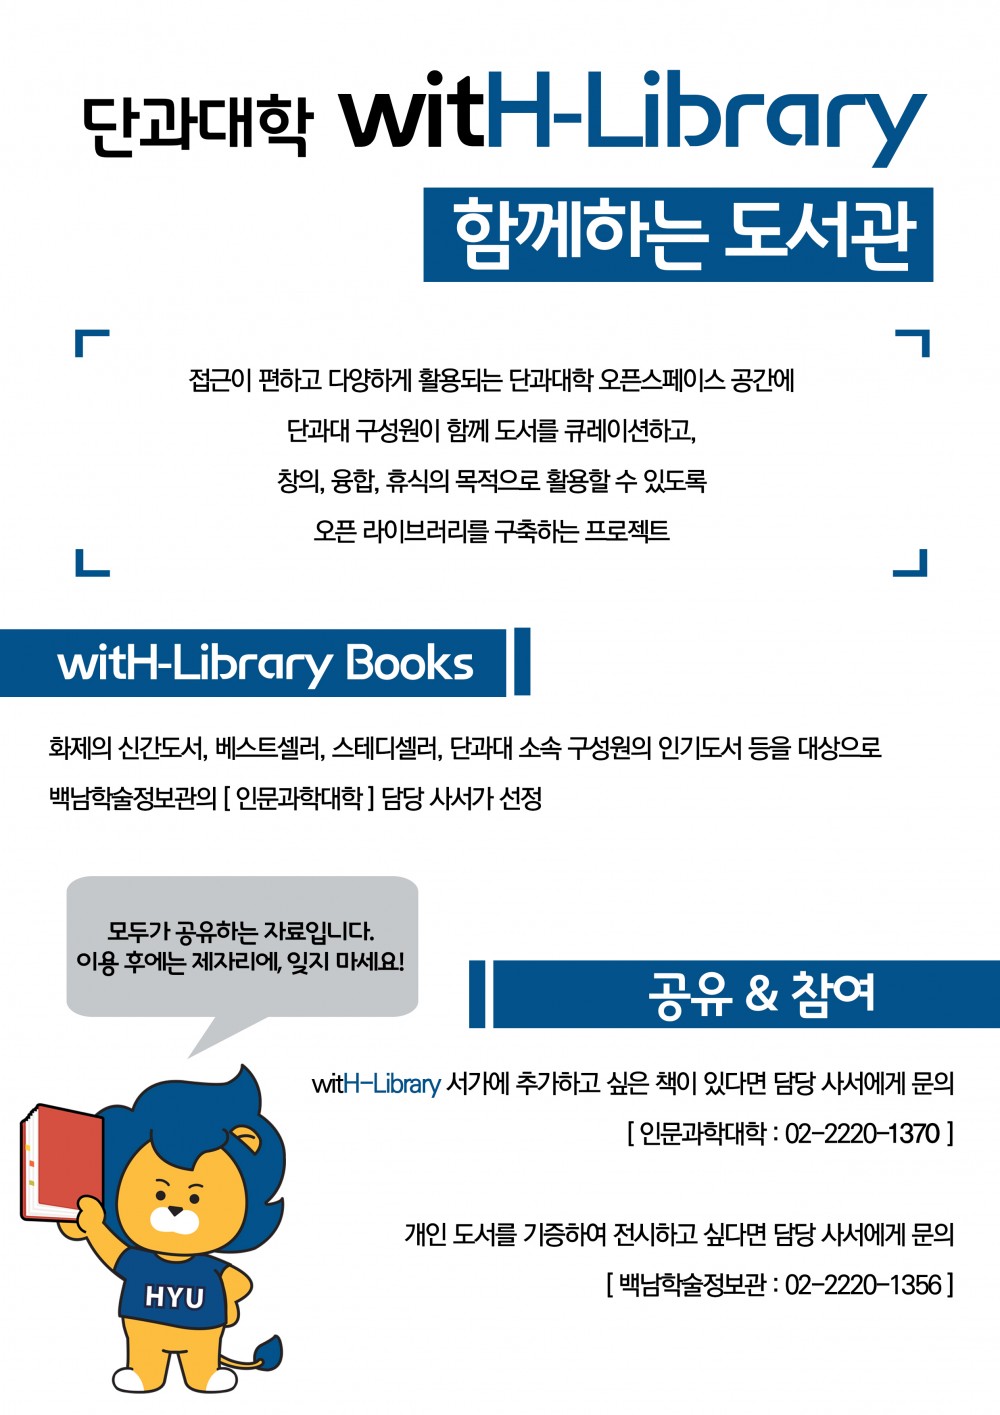 witH-Library 안내문(A4 사이즈) 예시